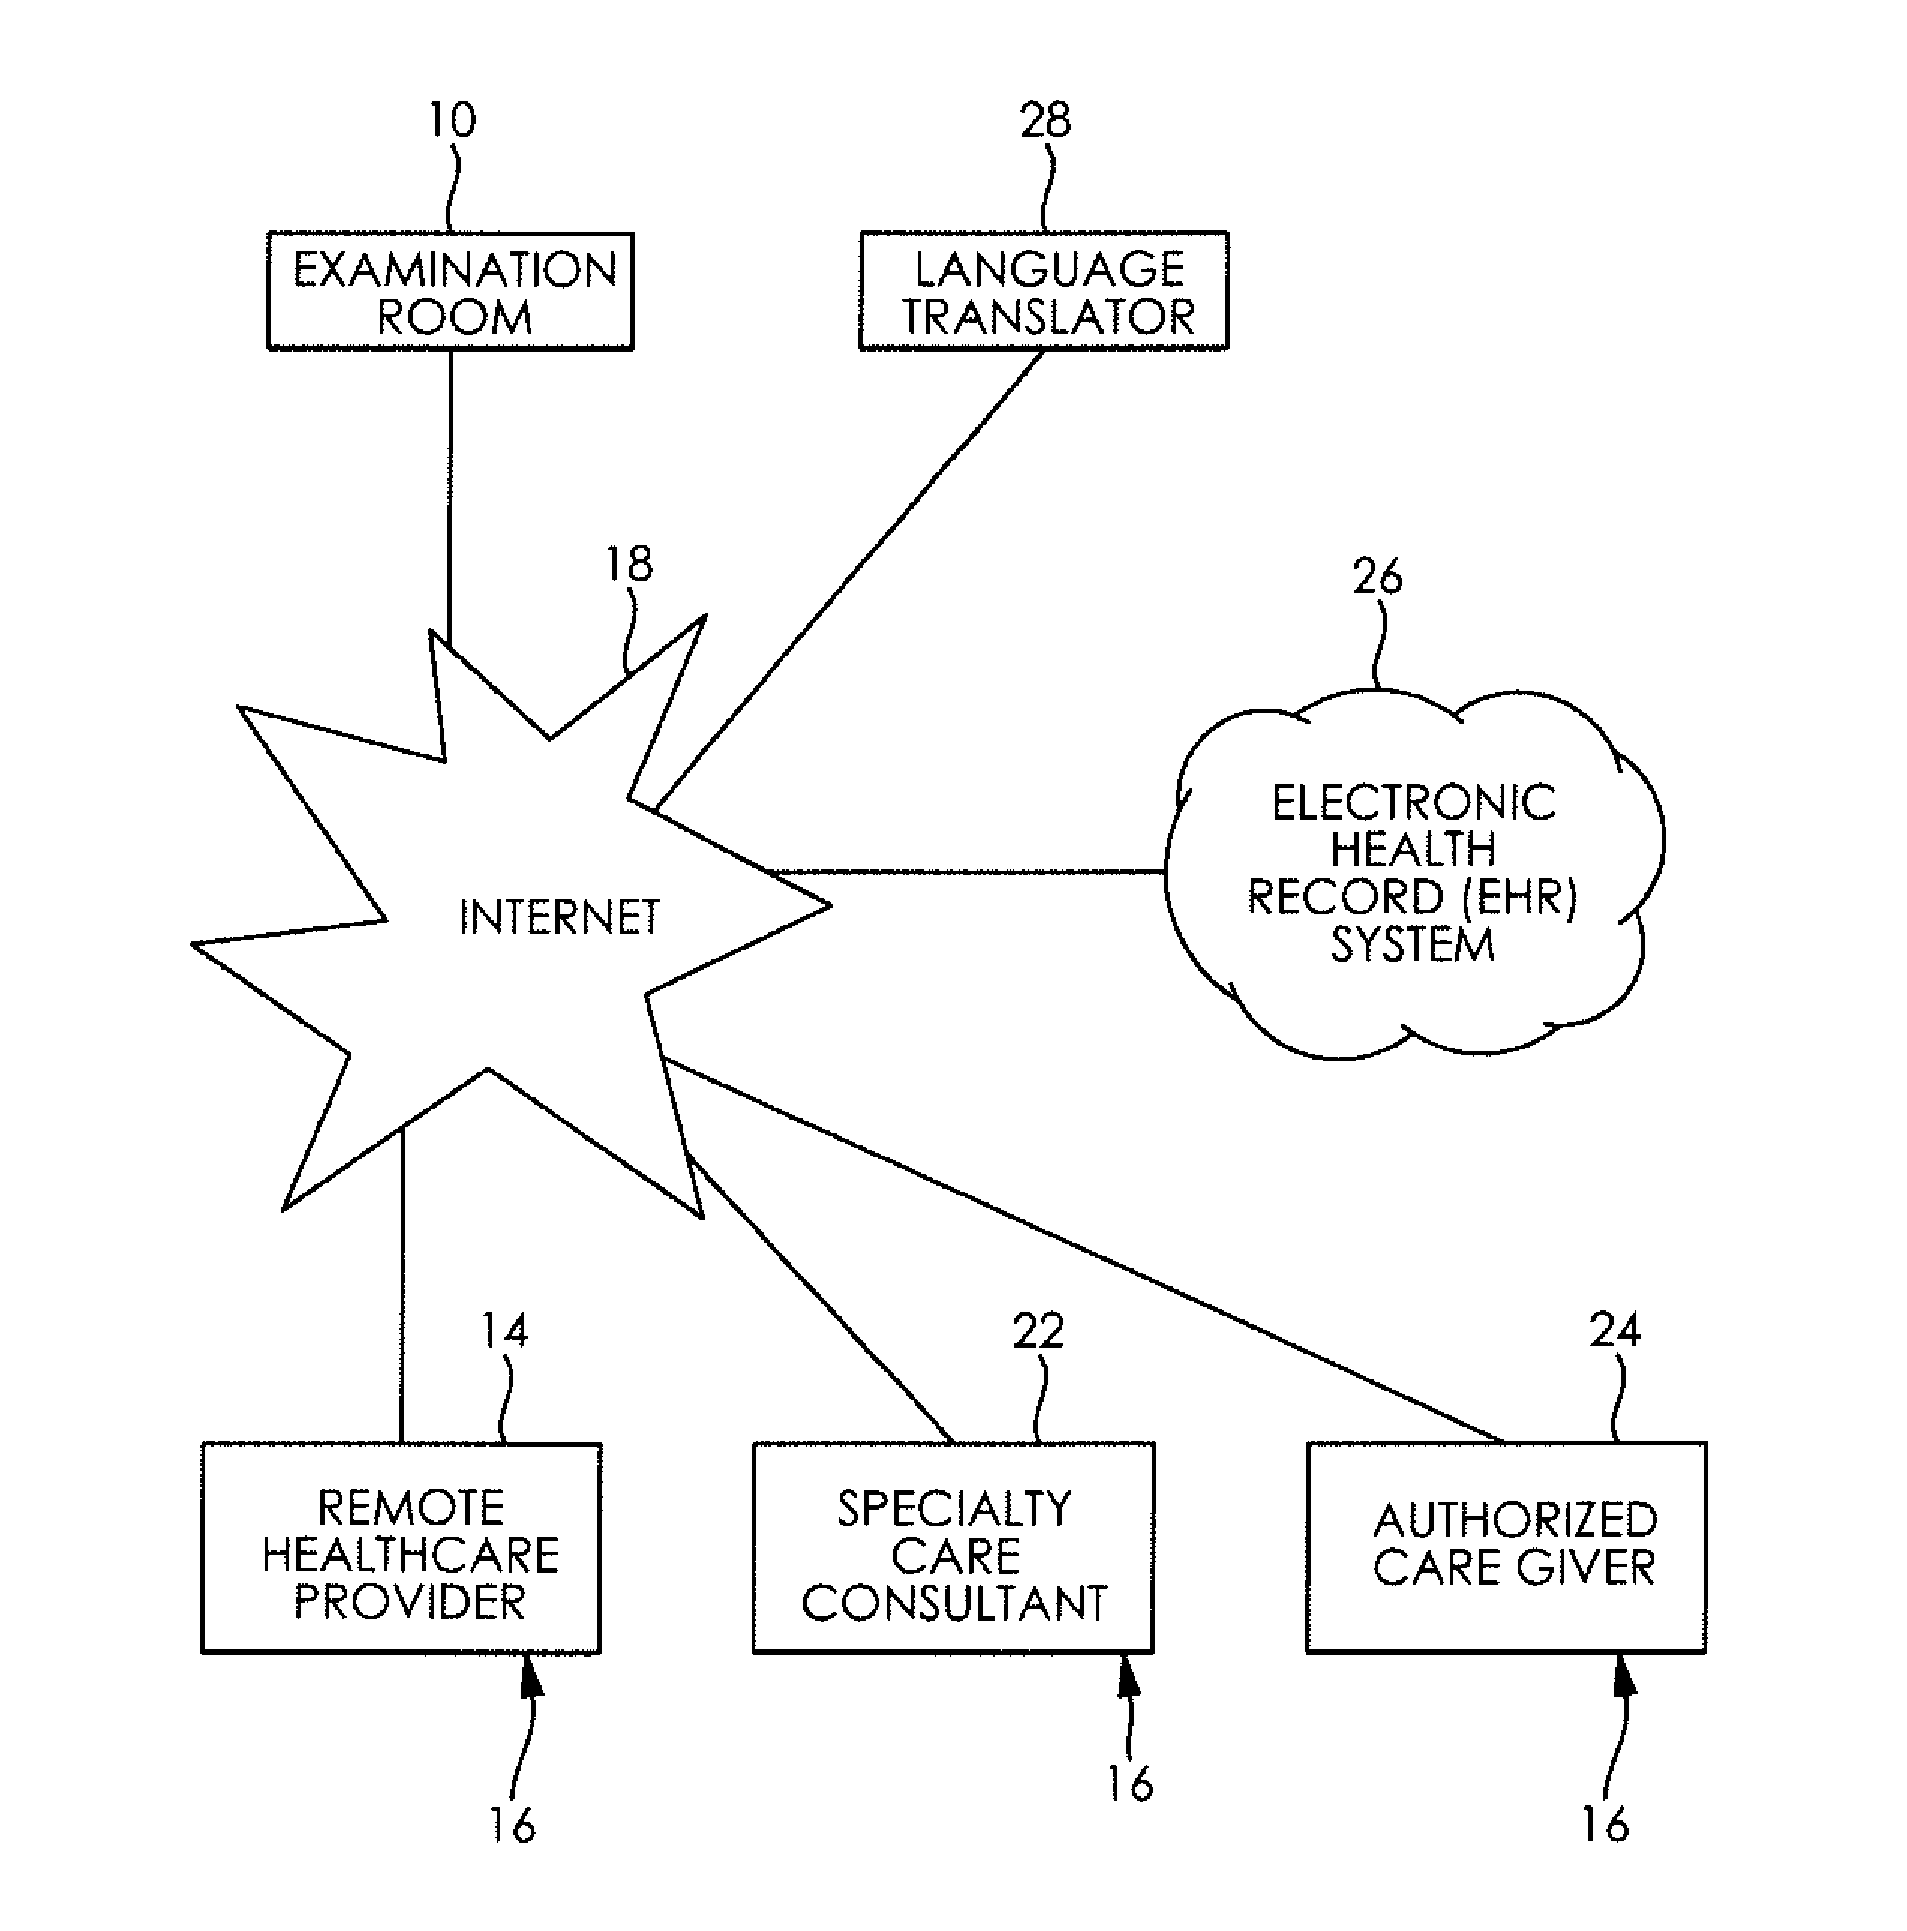 System and Method for Providing Healthcare Services via Telecommunication Networks with Enhanced Interaction between Healthcare Providers and Patients